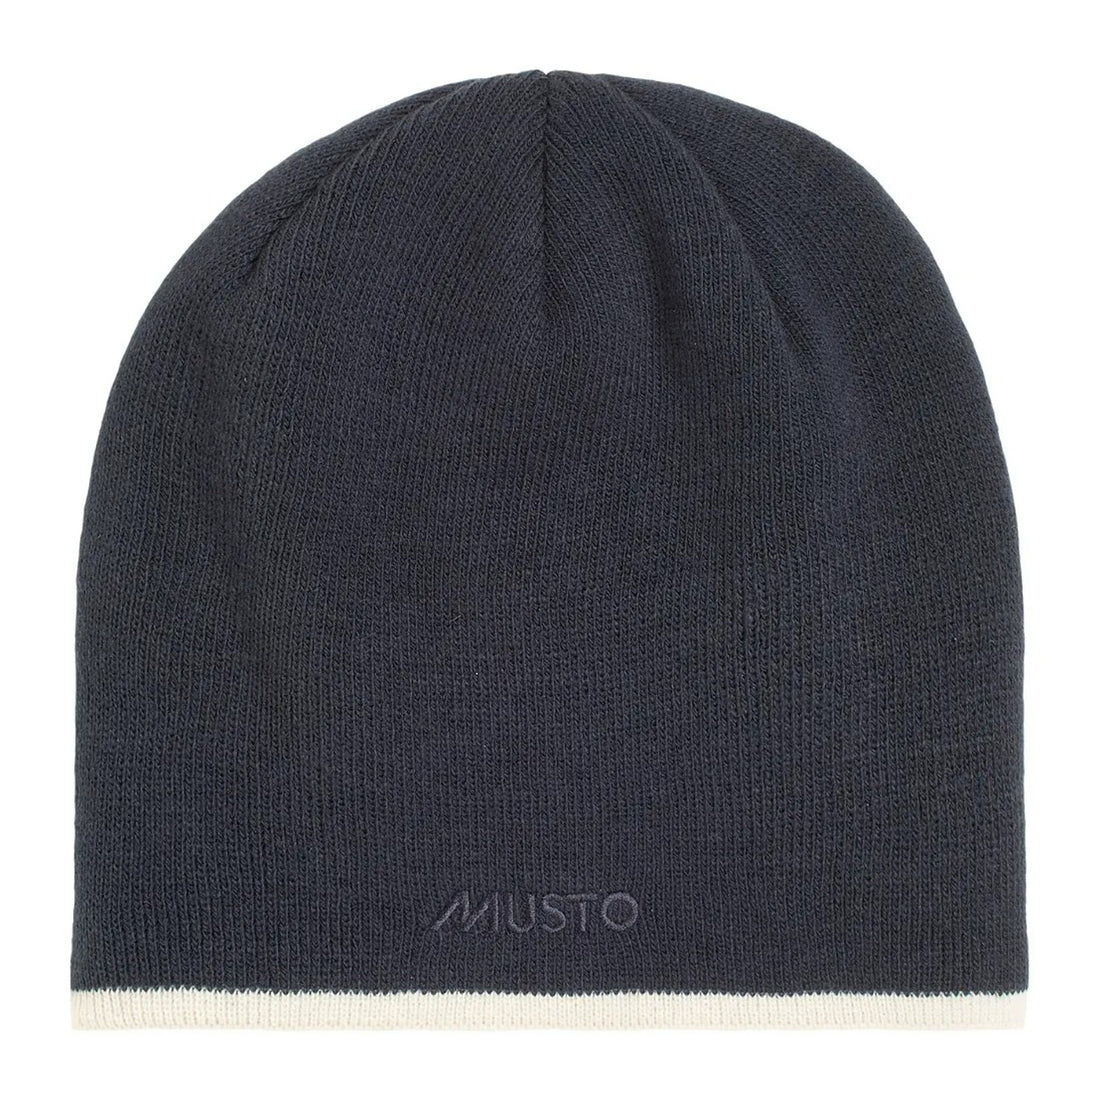 Musto-Knitted-Beanie